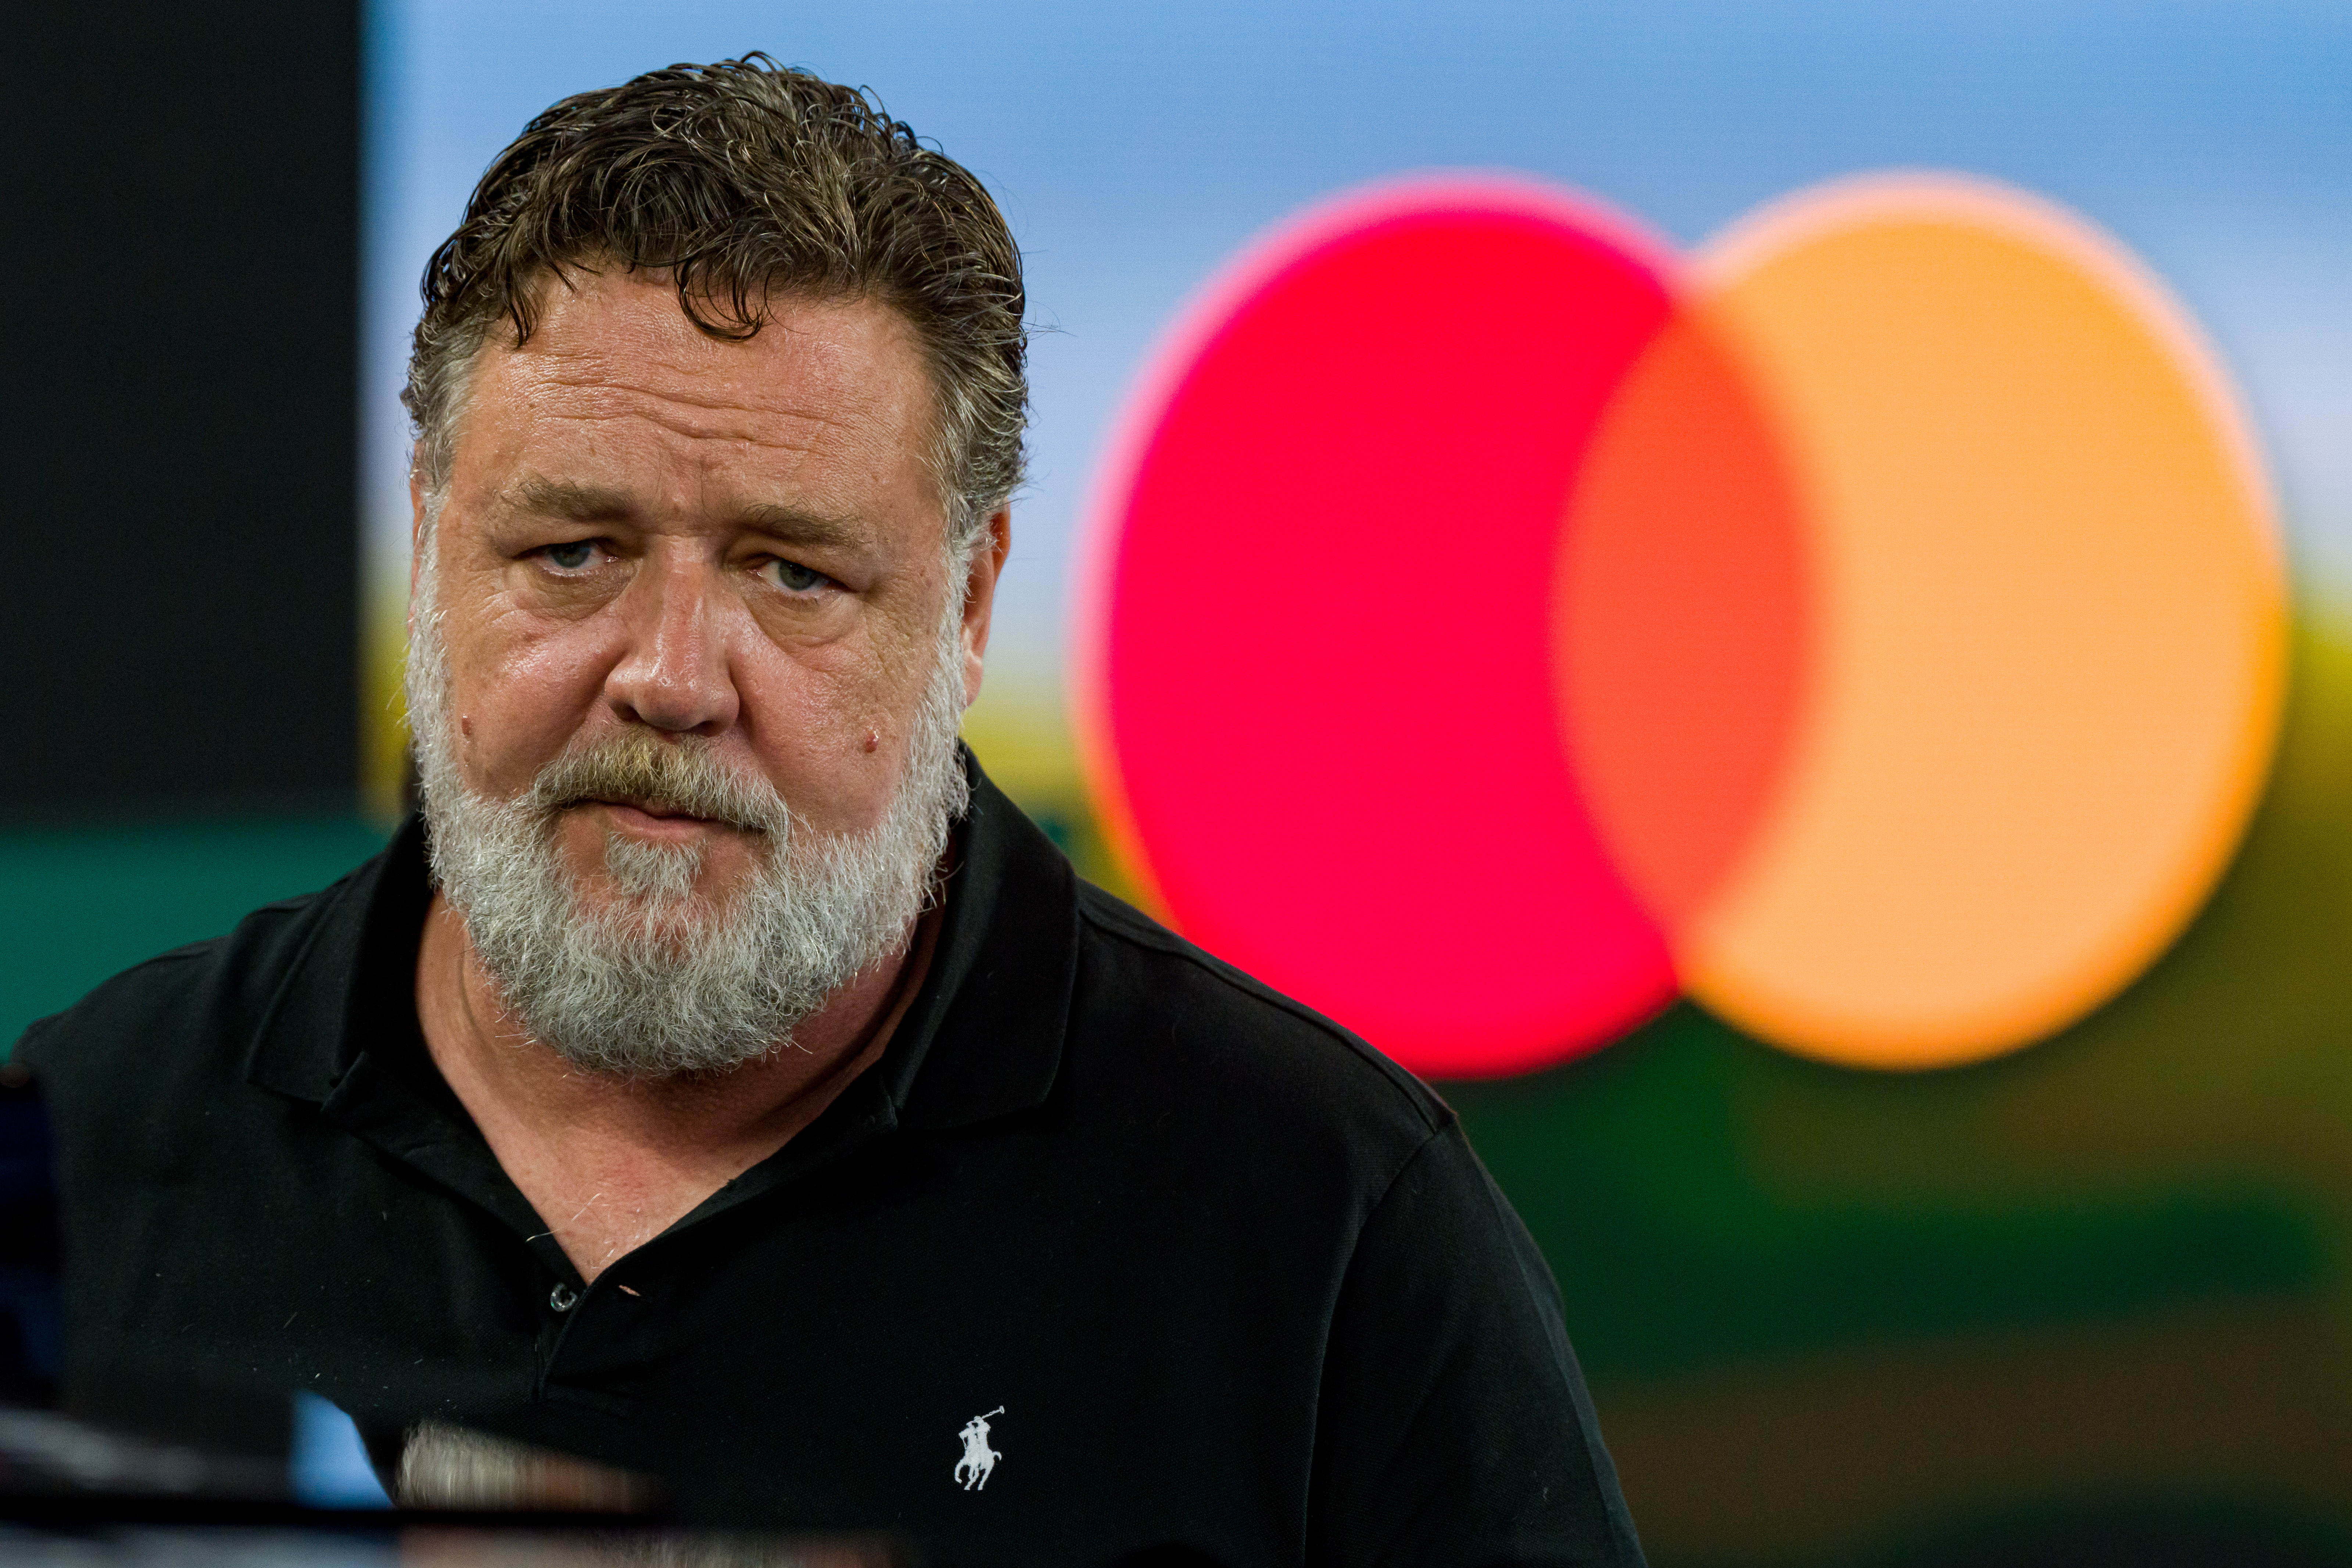 Russell Crowe am 28. Januar 2023 in Melbourne | Quelle: Getty Images